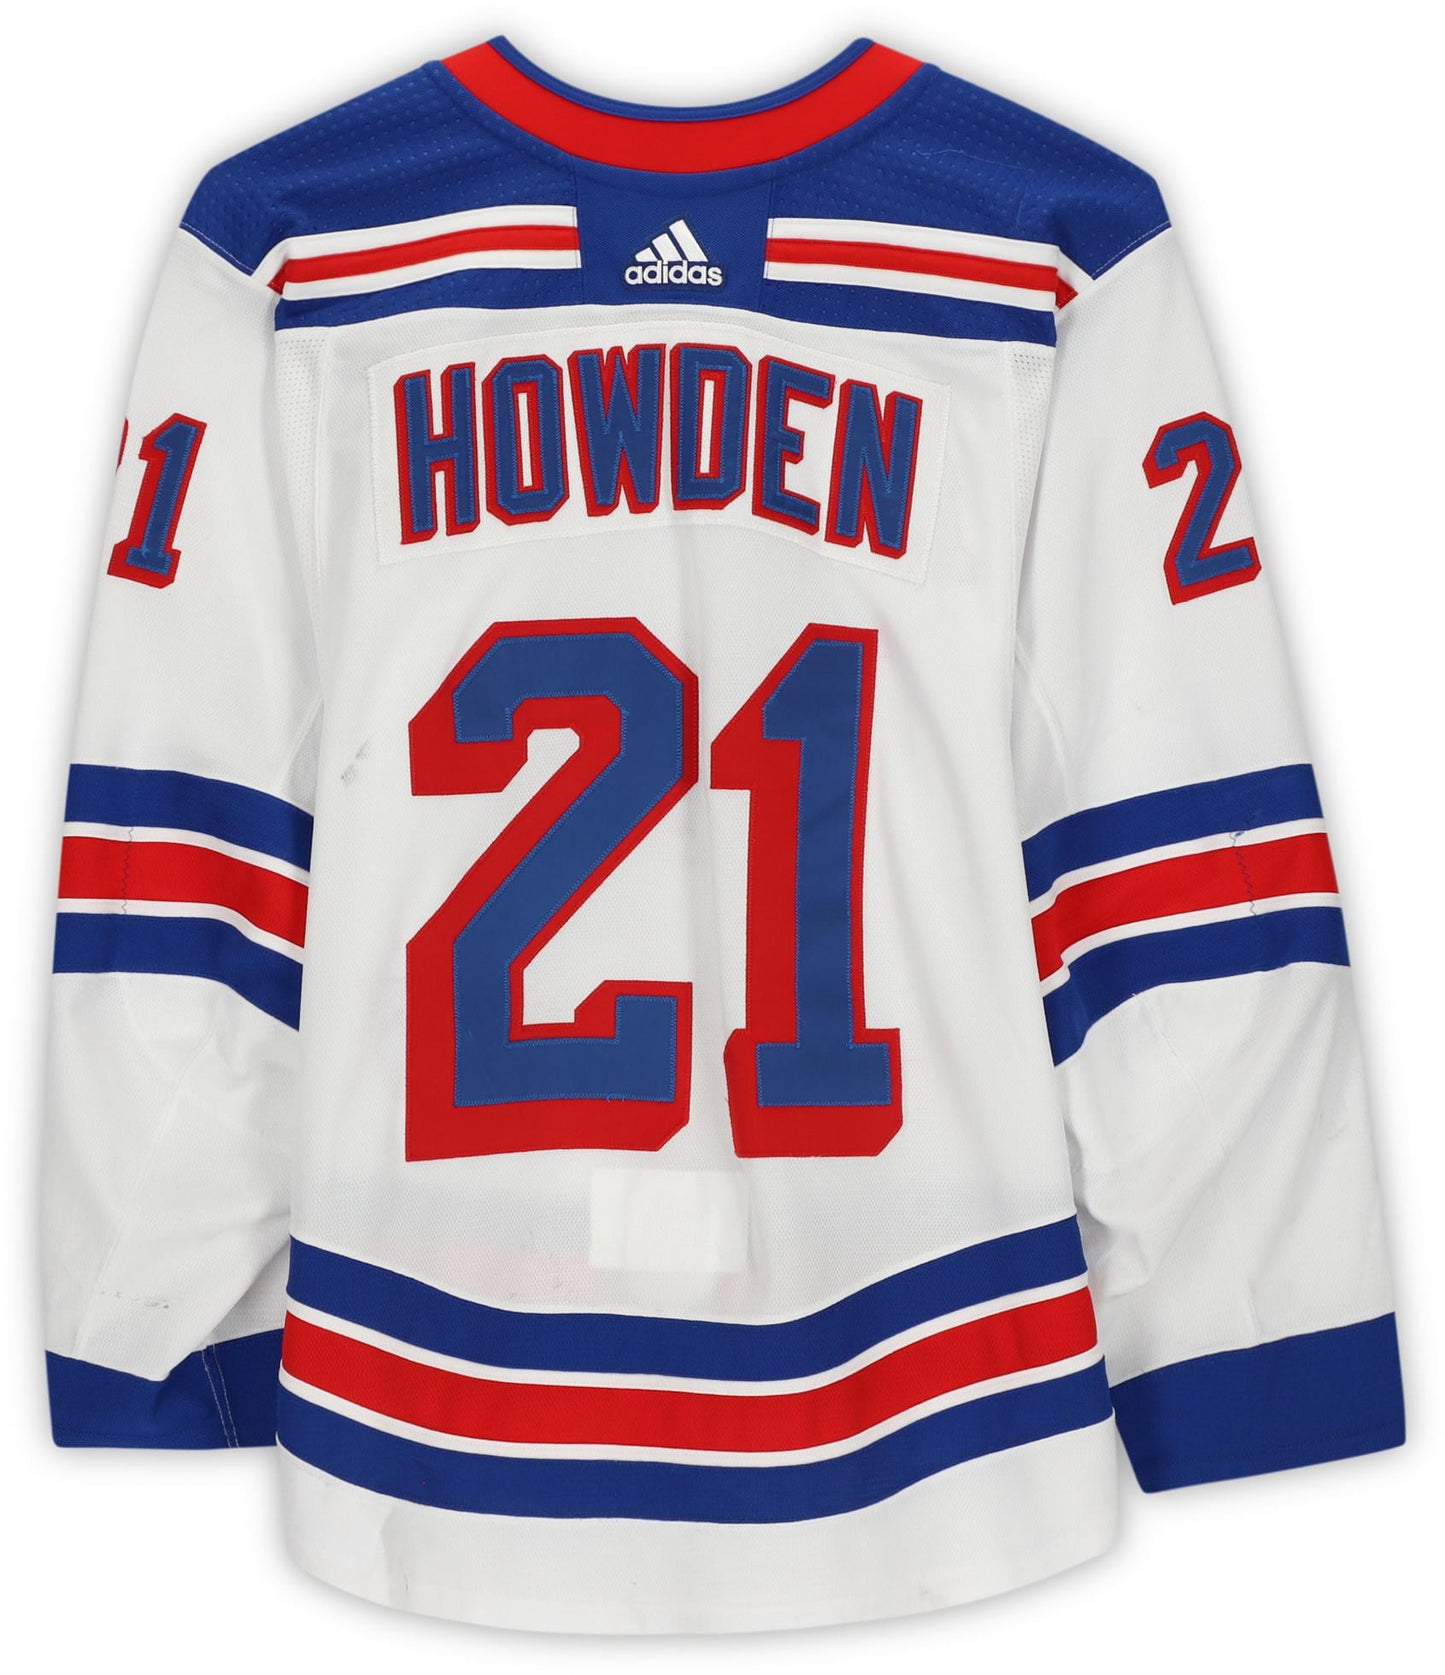 Brett Howden New York Rangers Game-Used #21 White Set 1 Jersey Worn During Away Games Played Between January 22nd and February 20th of the 2021 NHL Season - Size 56 - Fanatics Authentic Certified